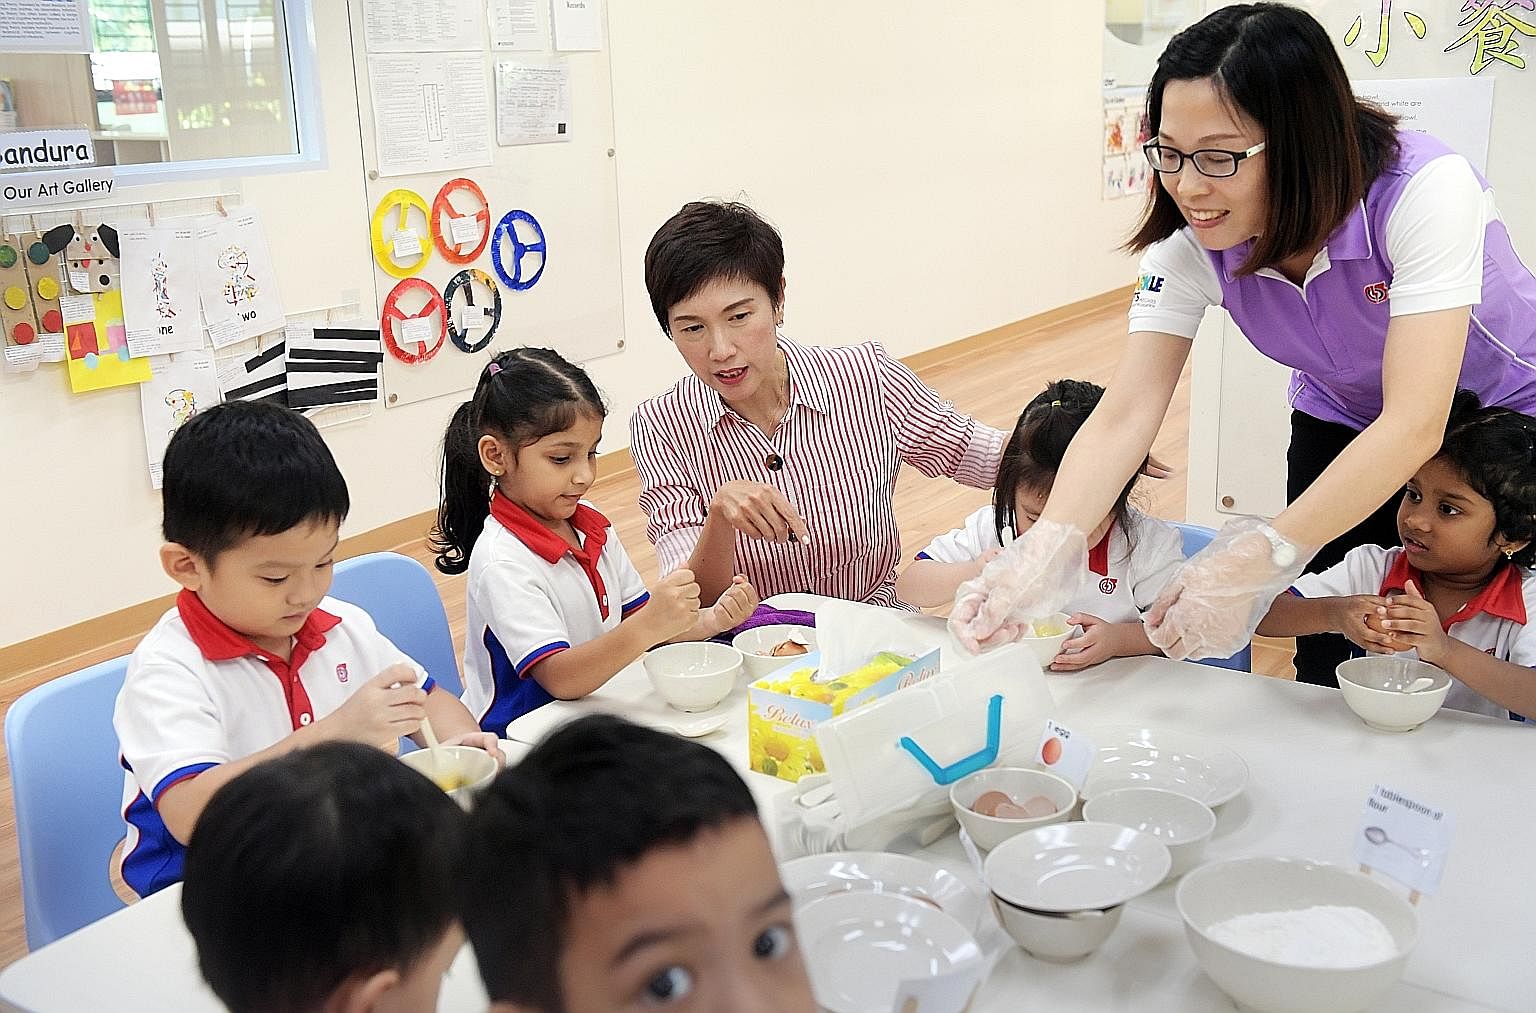 Manpower Minister Josephine Teo at a PCF Sparkletots pre-school earlier this month. She says birth rates are influenced more by values and attitudes on parenthood, which do not change much in the short term. ST PHOTO: ALPHONSUS CHERN